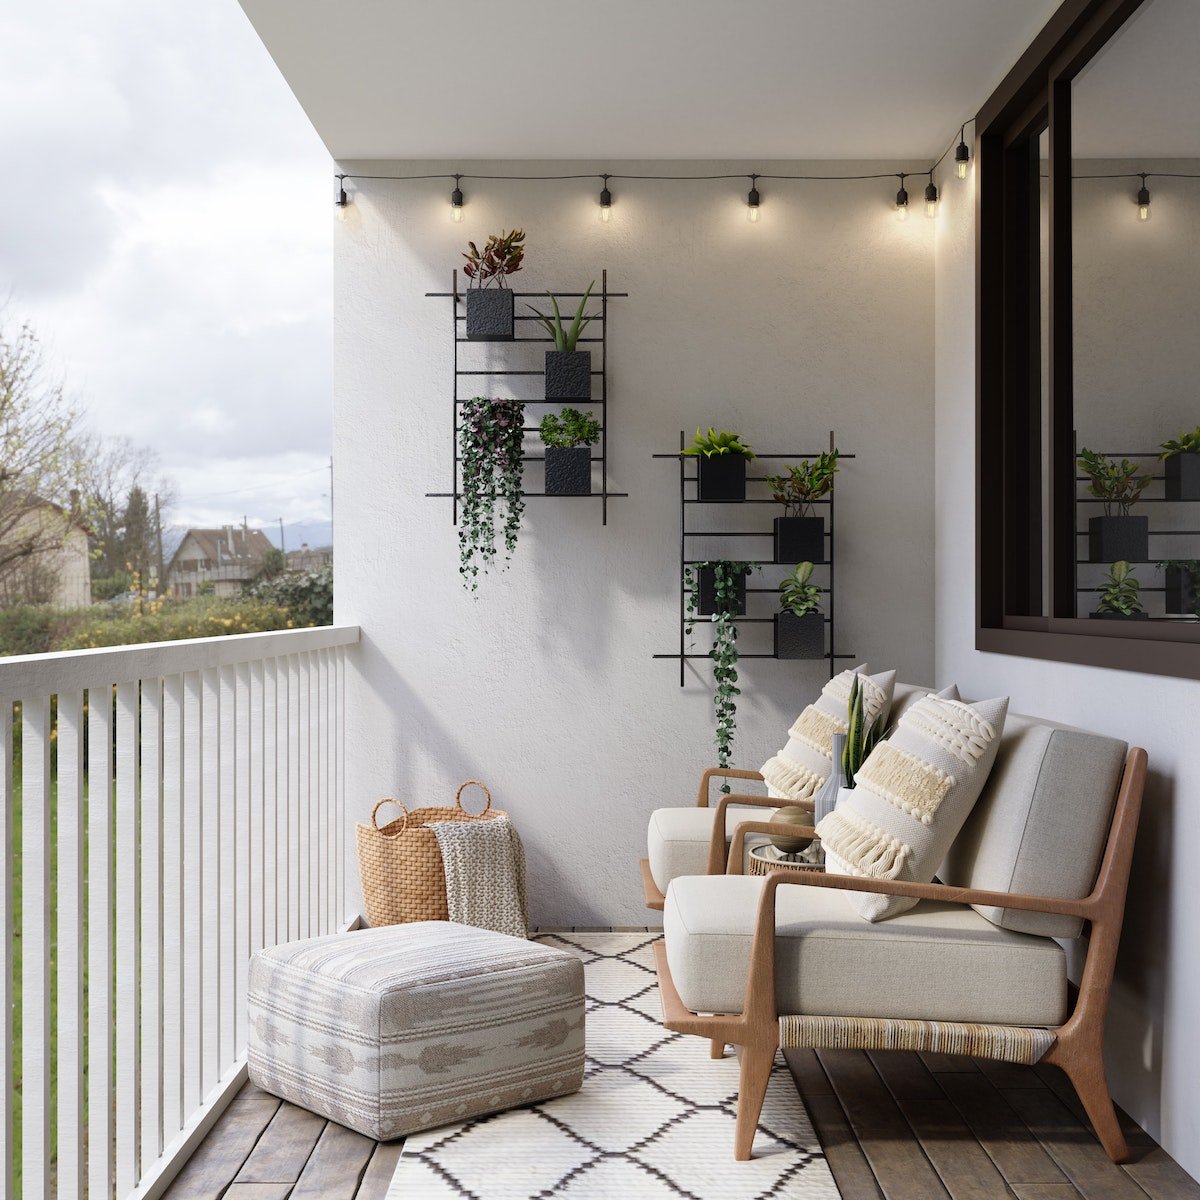 Balcony with Outdoor Shelving & Outdoor Soft Furnishings